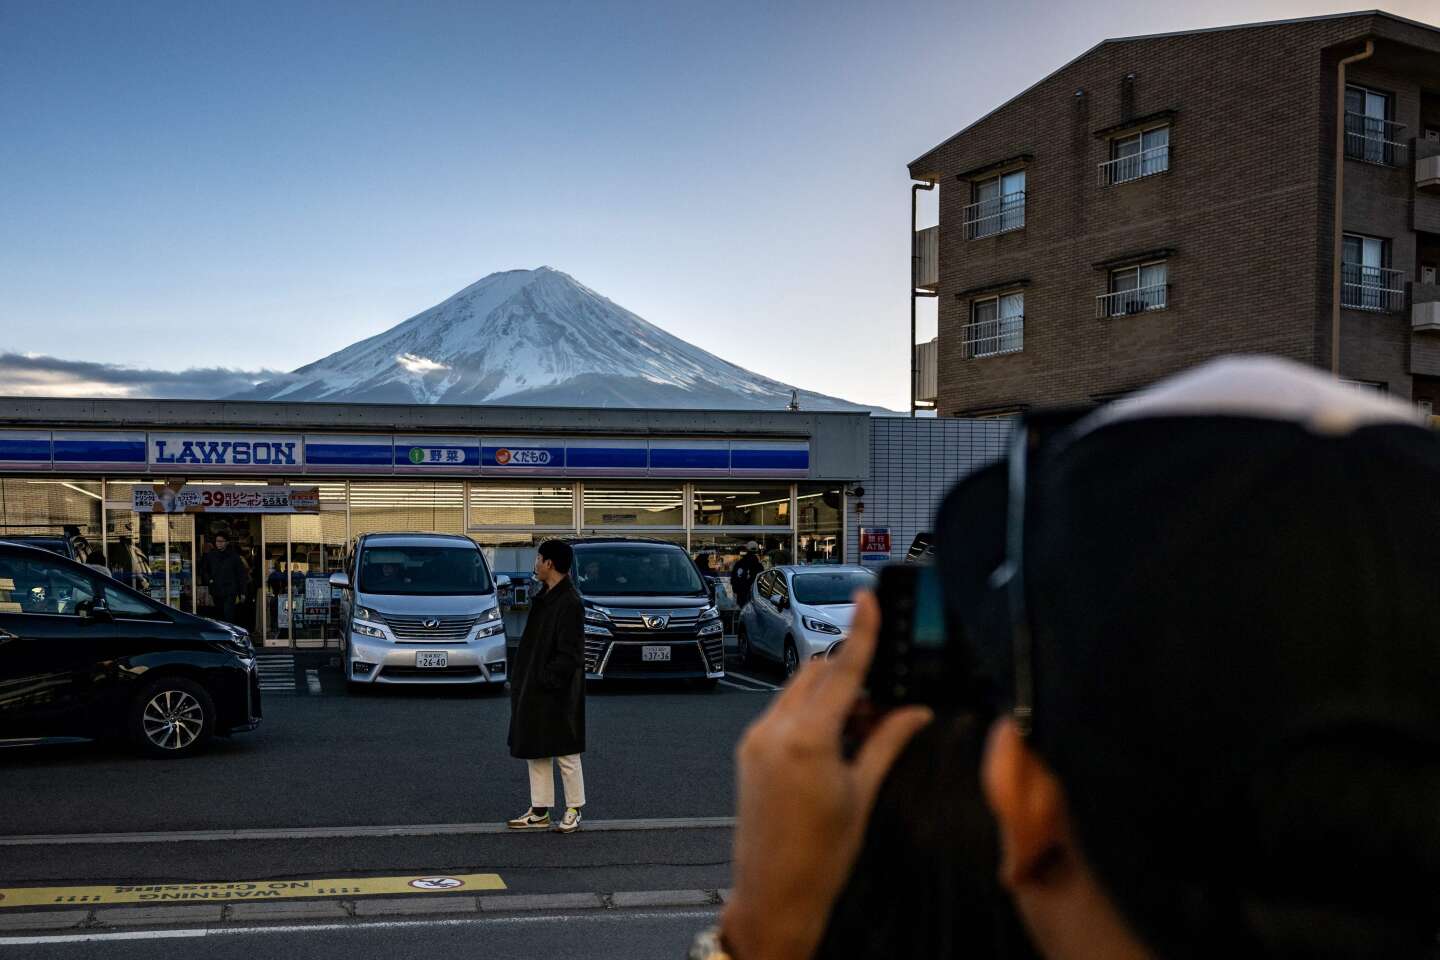 In Japan, a city will hide the view of Mount Fuji to avoid excessive tourism